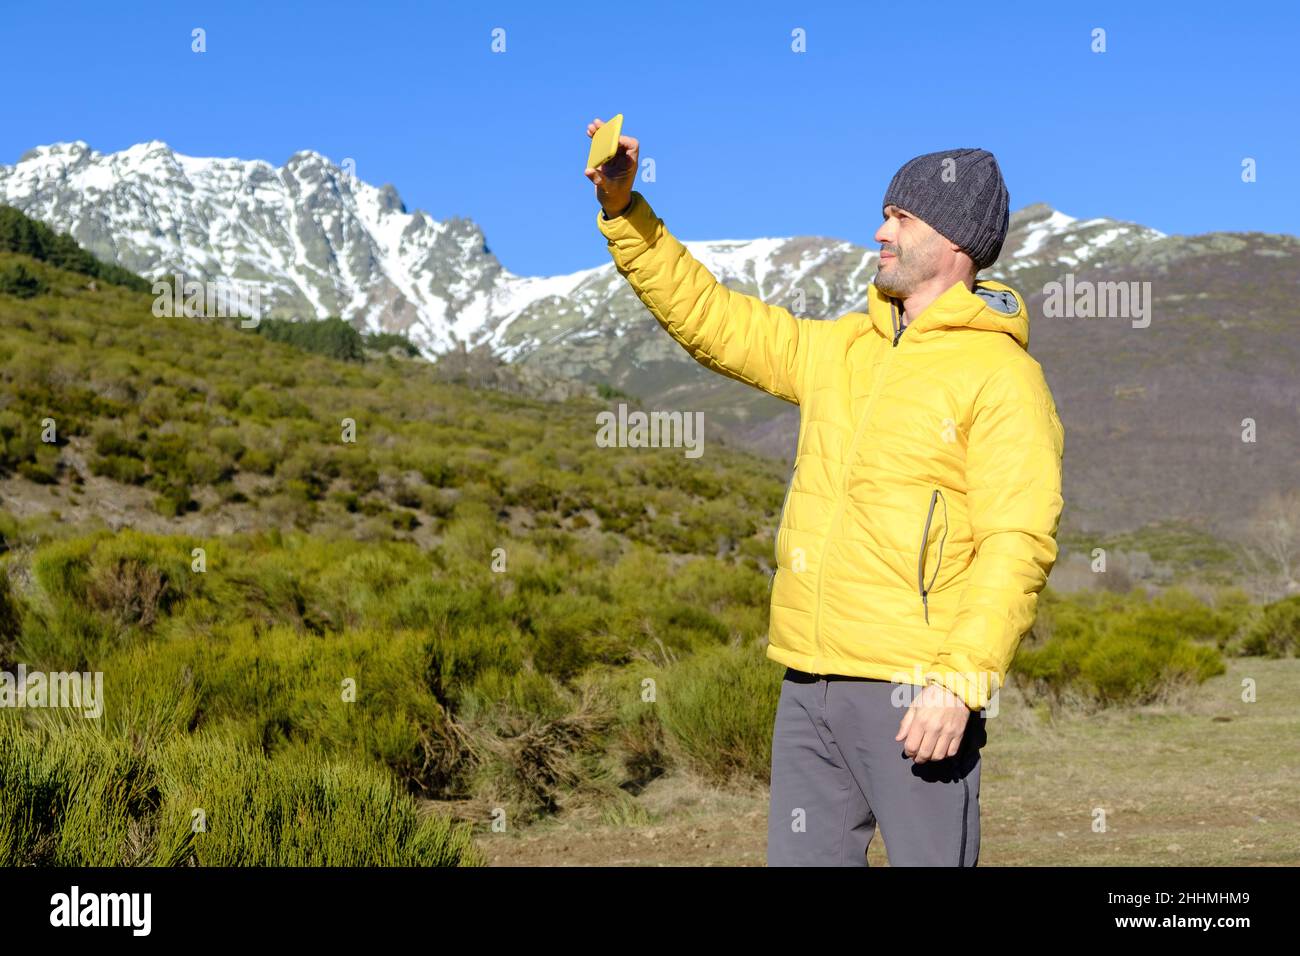 A man takes a selfie with his smartphone in the snowy mountains. Enjoying nature alone Stock Photo